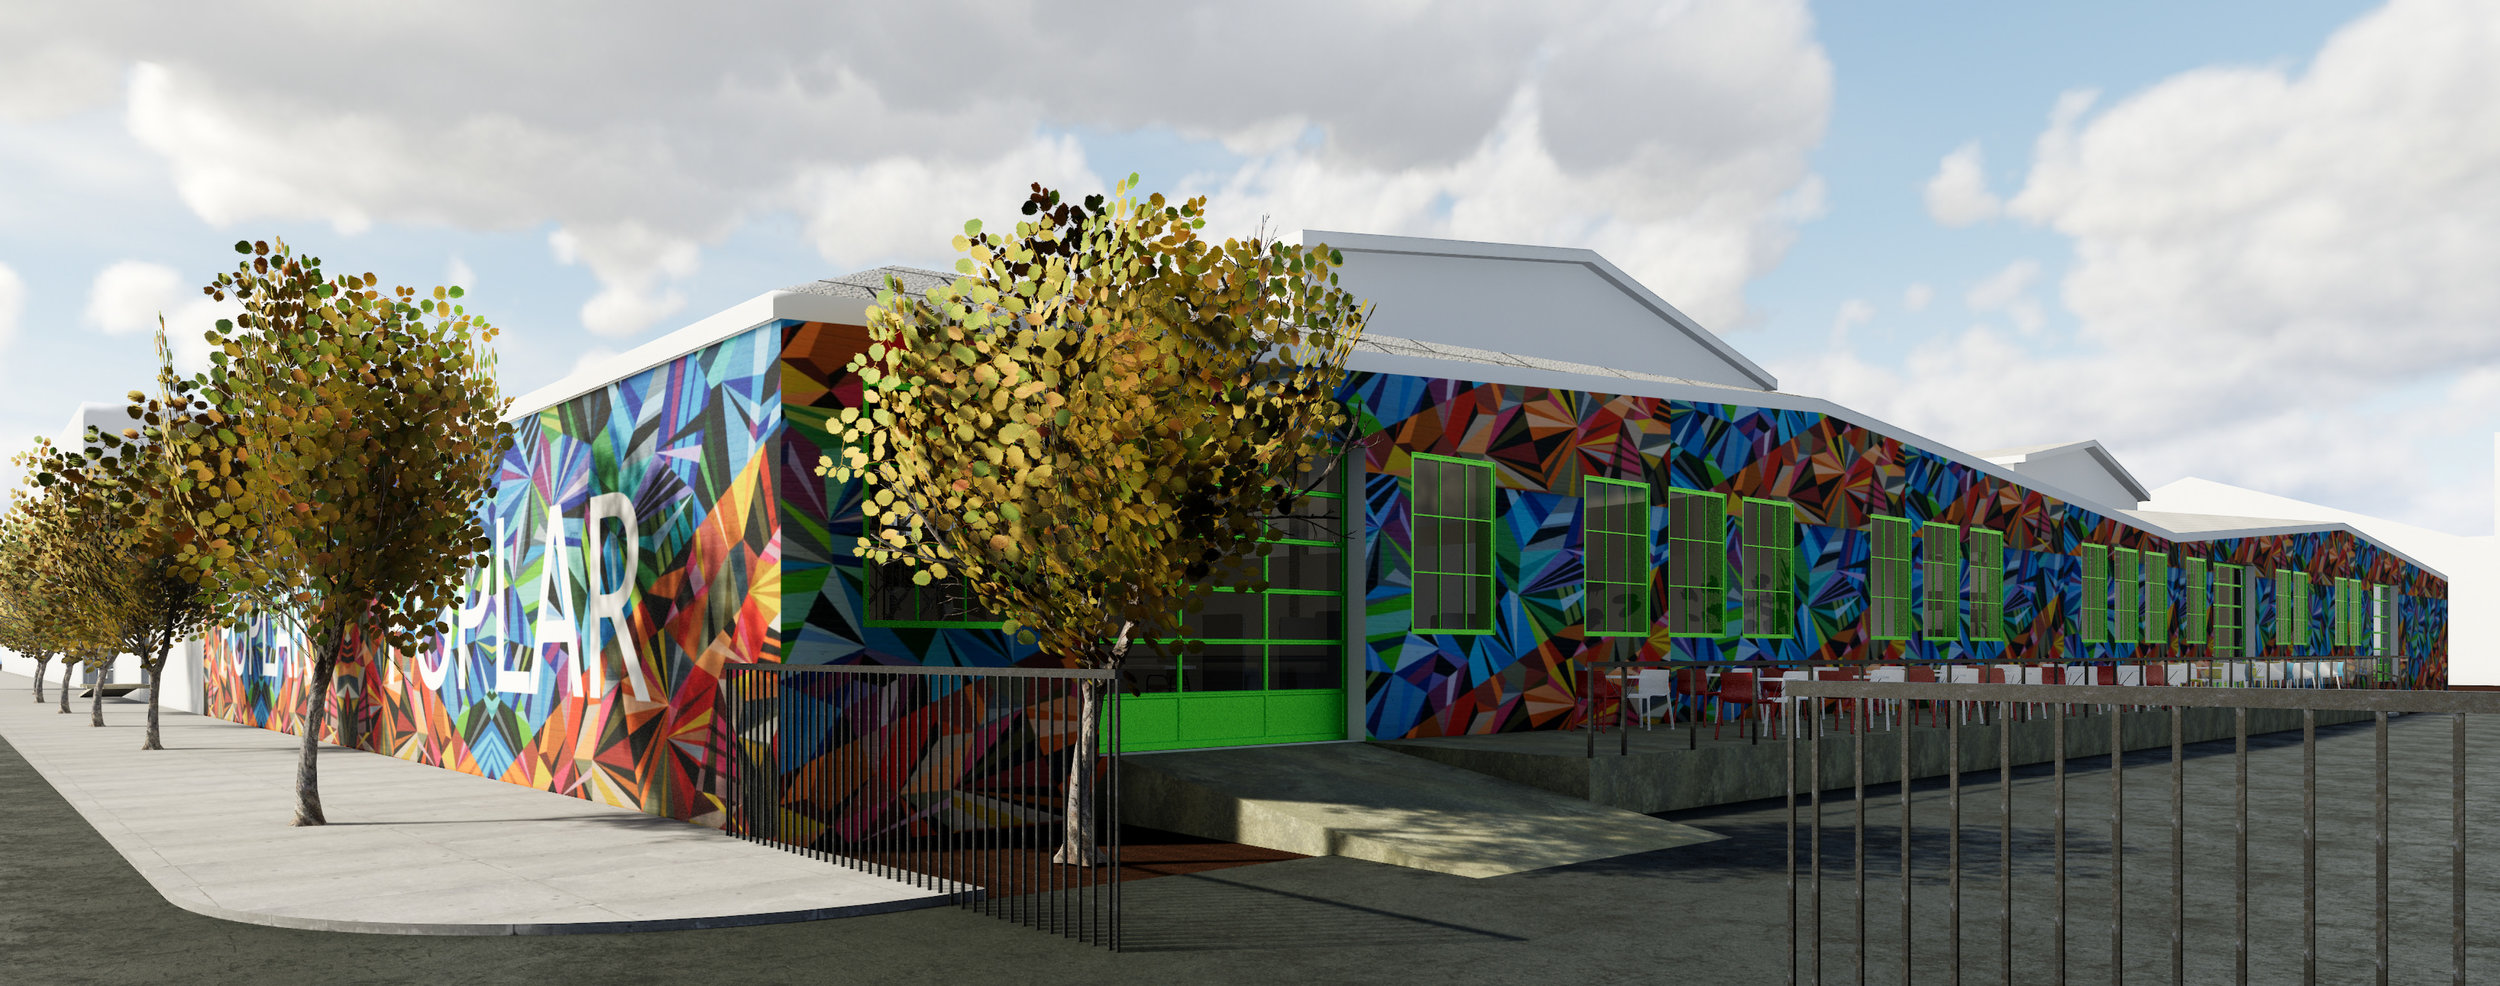  A vibrant paint scheme to show the concept of how the facade could look with a full wall mural. 